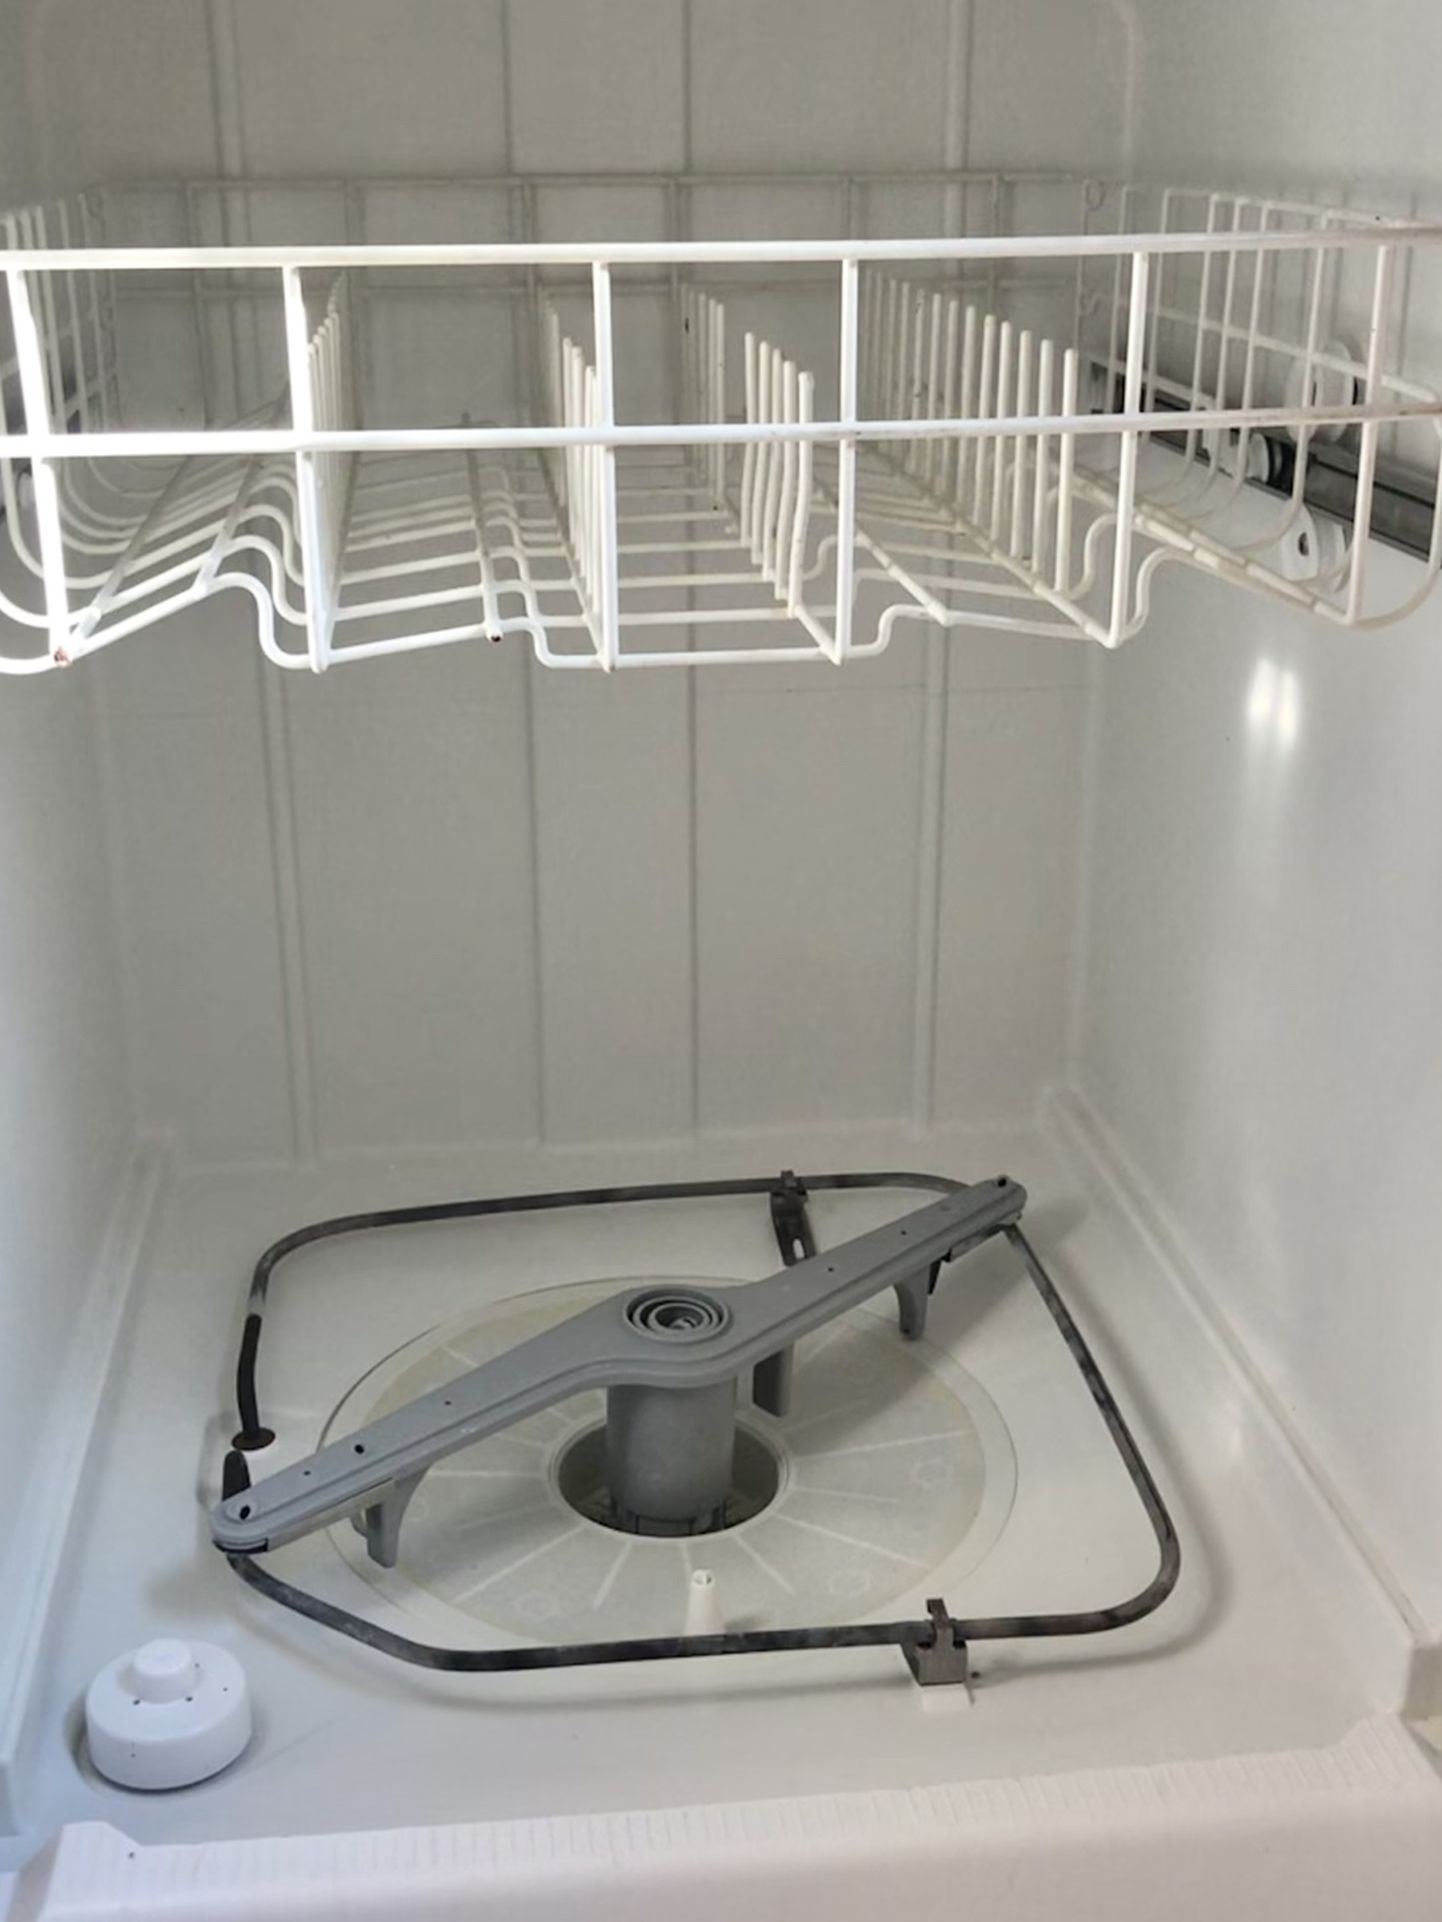 Dishwasher Stopped Working -want to get rid of ASAP